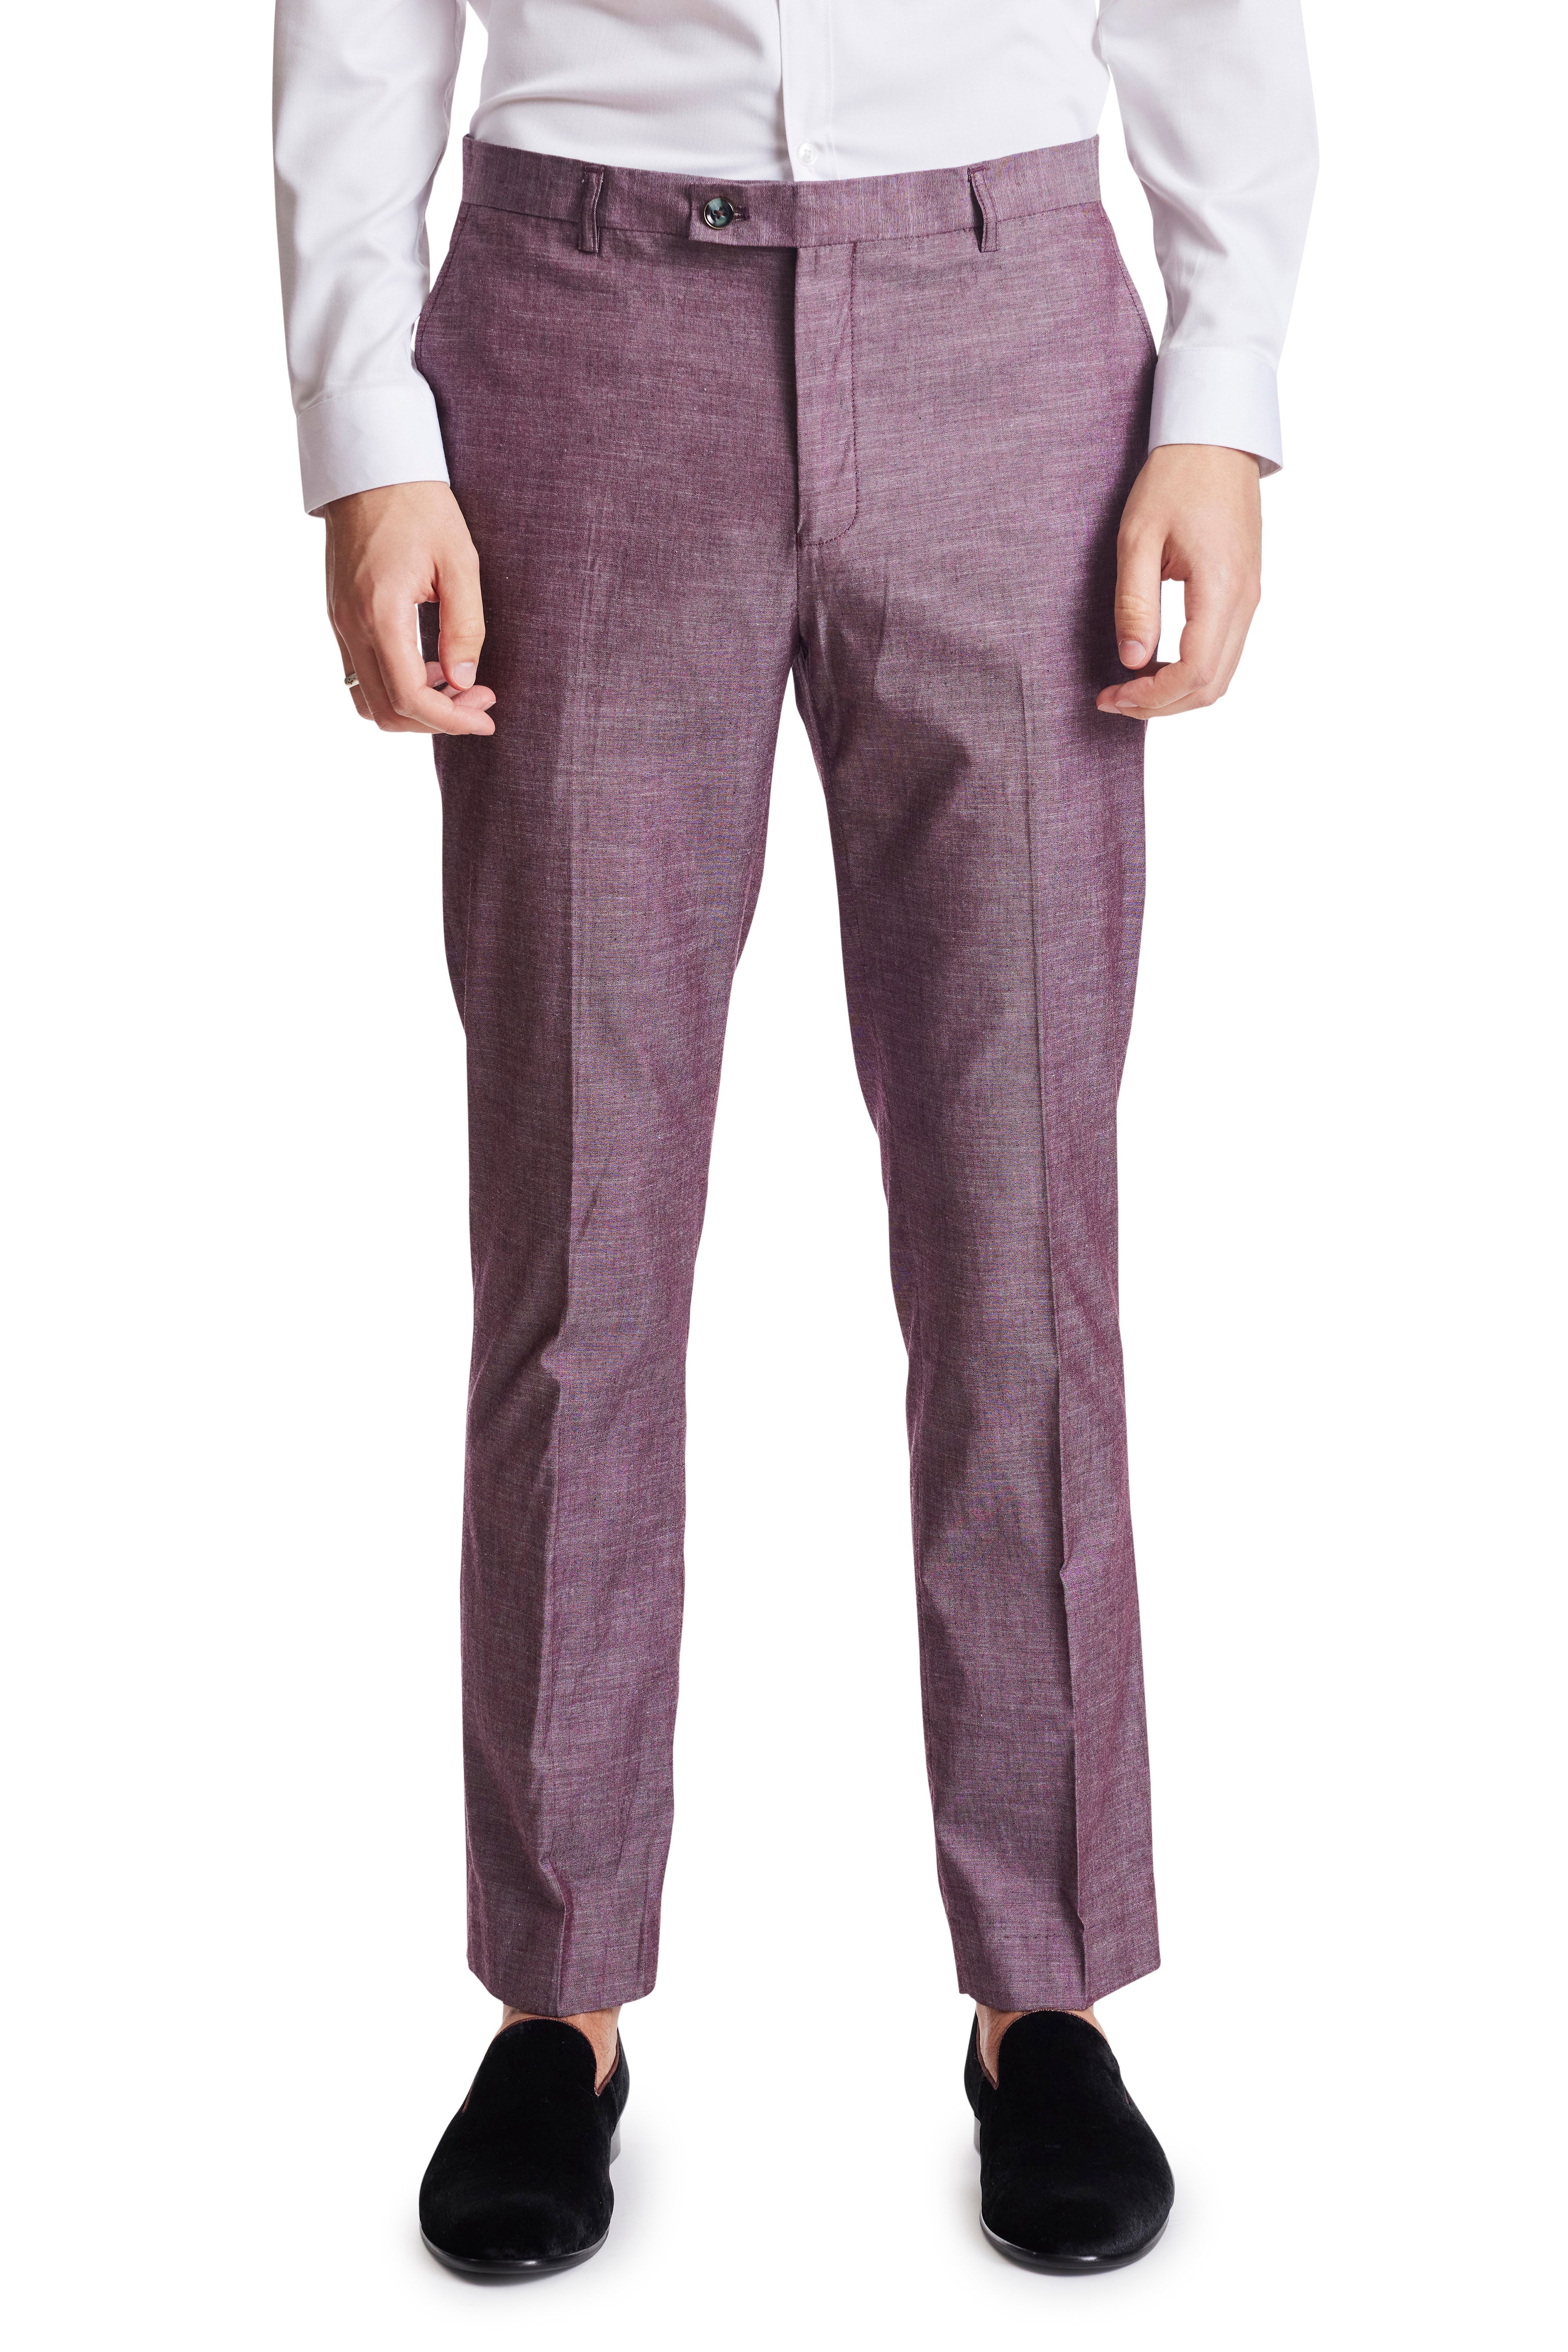 Downing Pants - slim - Mulberry